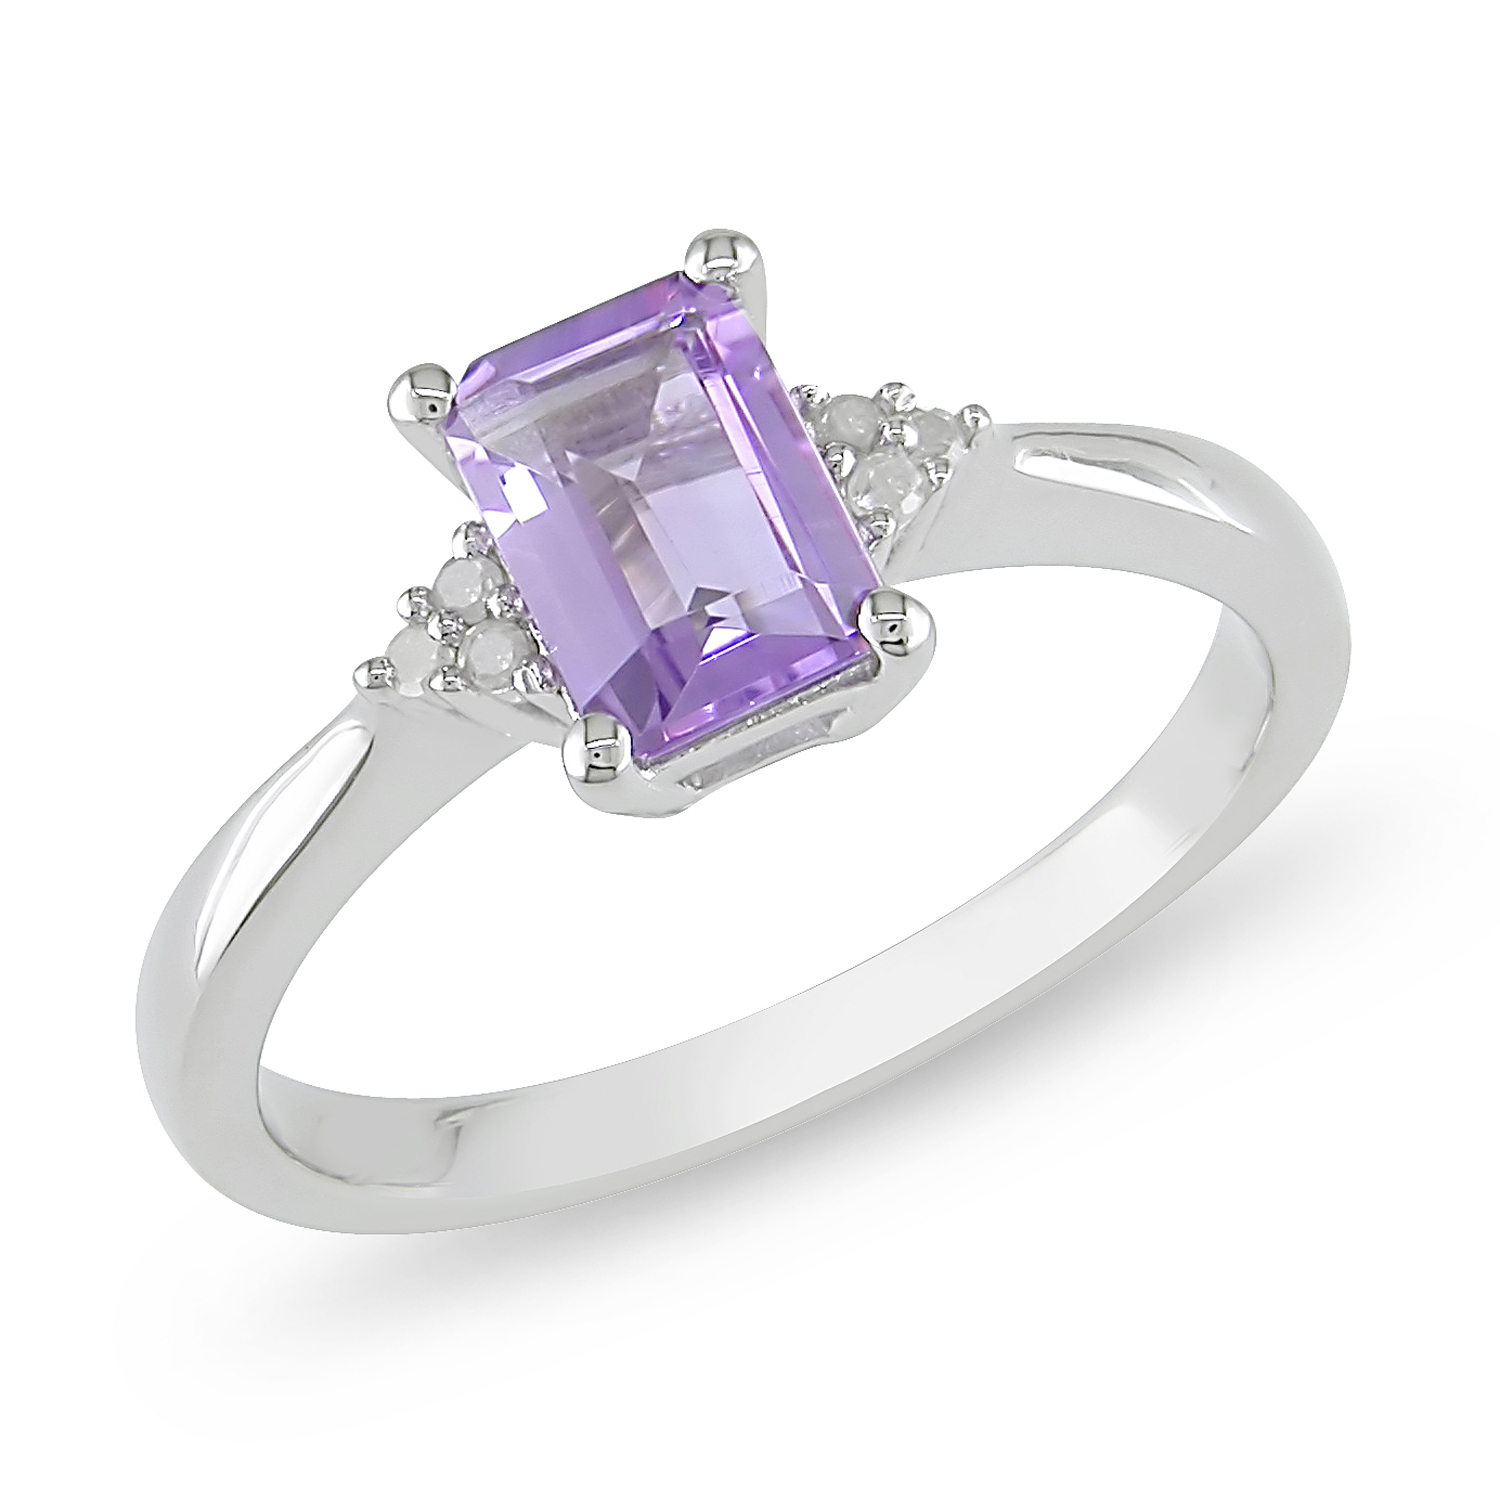 0.03 Carat T.W. Diamond and 7/8 Carat T.G.W. Amethyst Fashion Ring in Sterling Silver I3